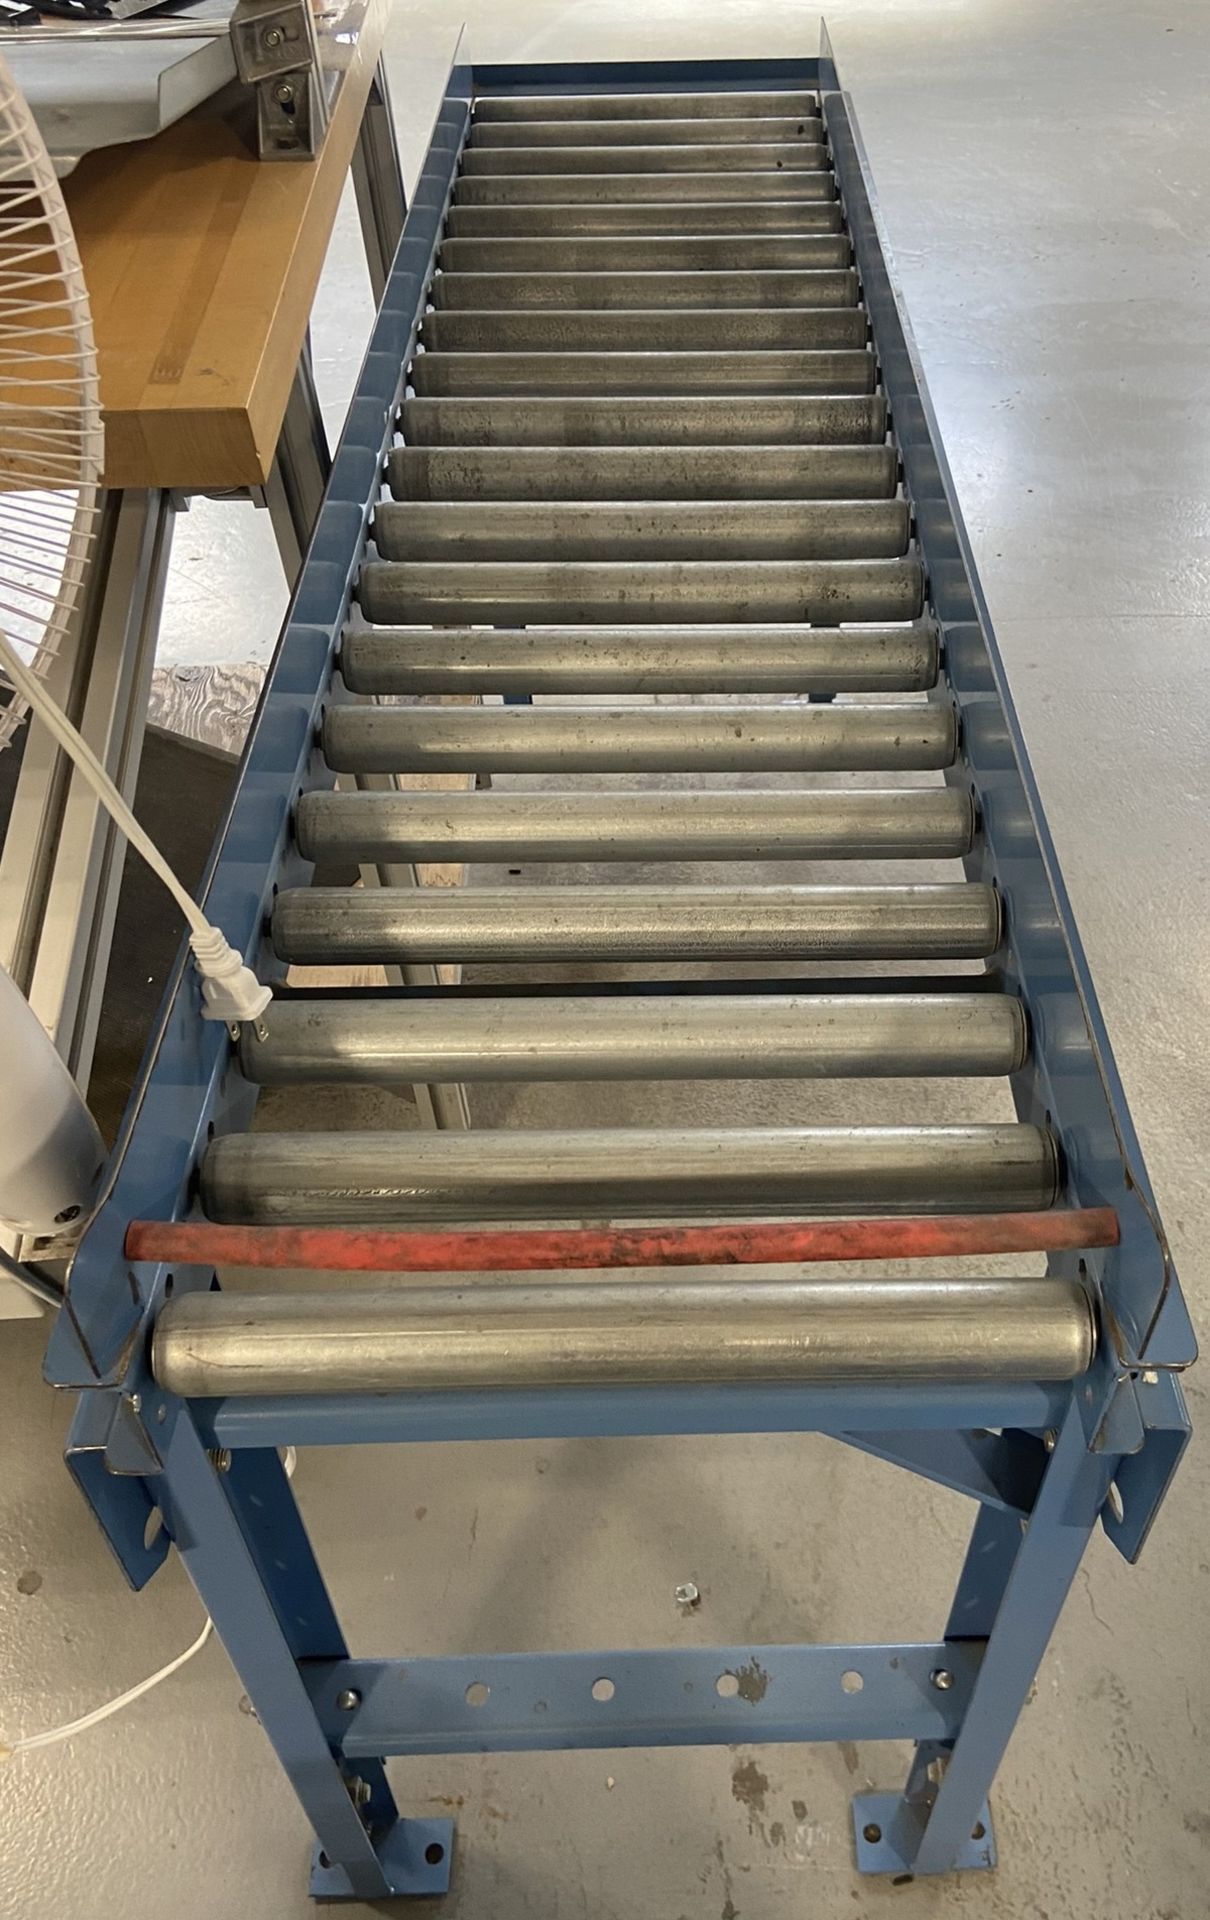 Gravity Roller Conveyors - Multiple (20+) - Image 6 of 21